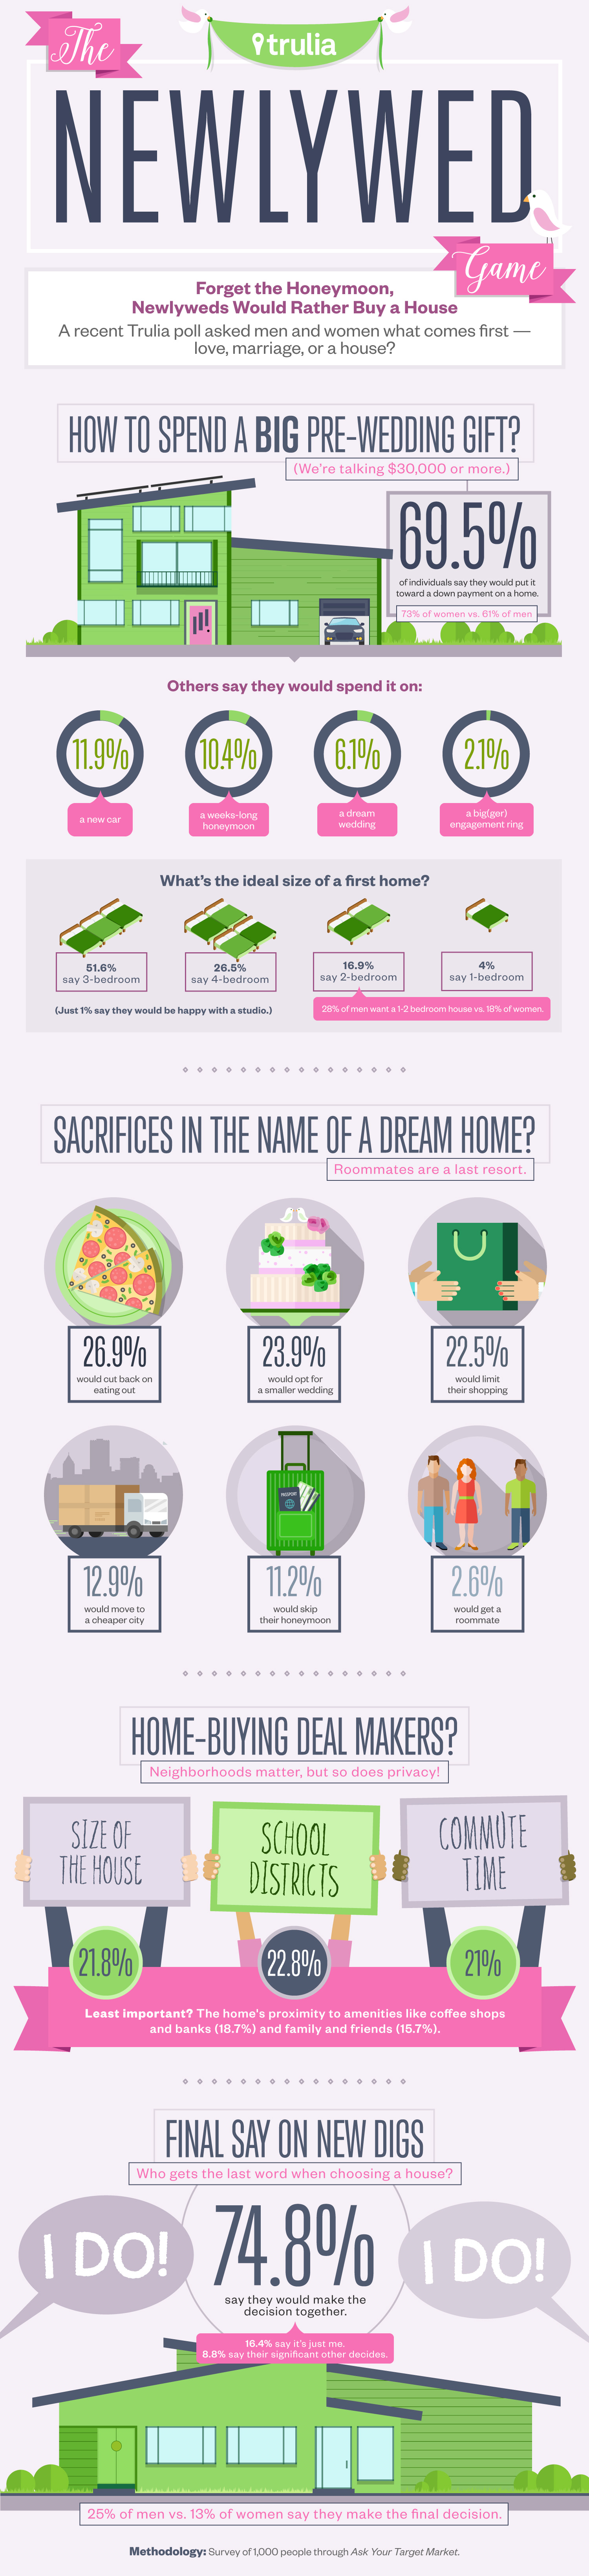 June2015-Trulia-The-Newlywed-Game-Infographic